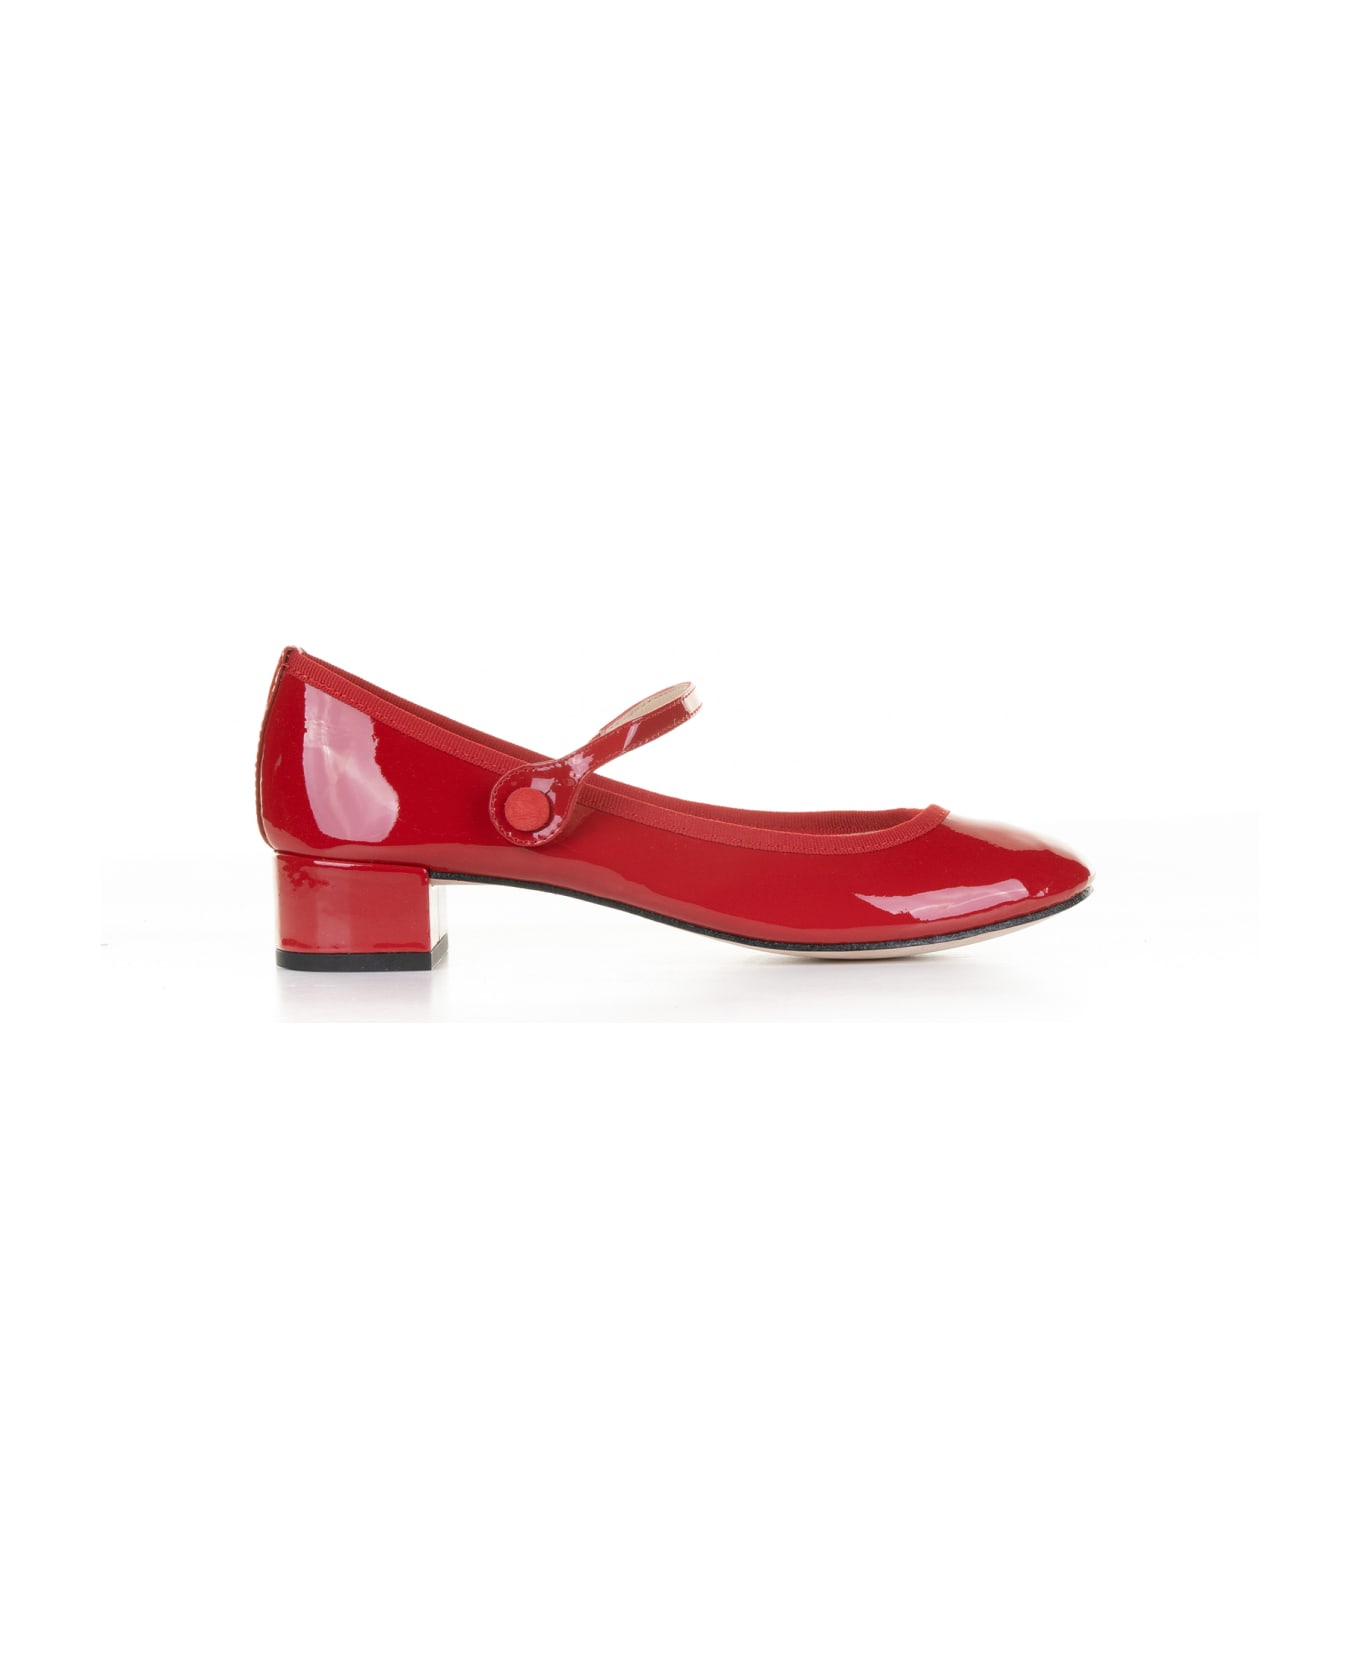 Repetto Ballerina In Shiny Leather With Strap - FLAMME ハイヒール